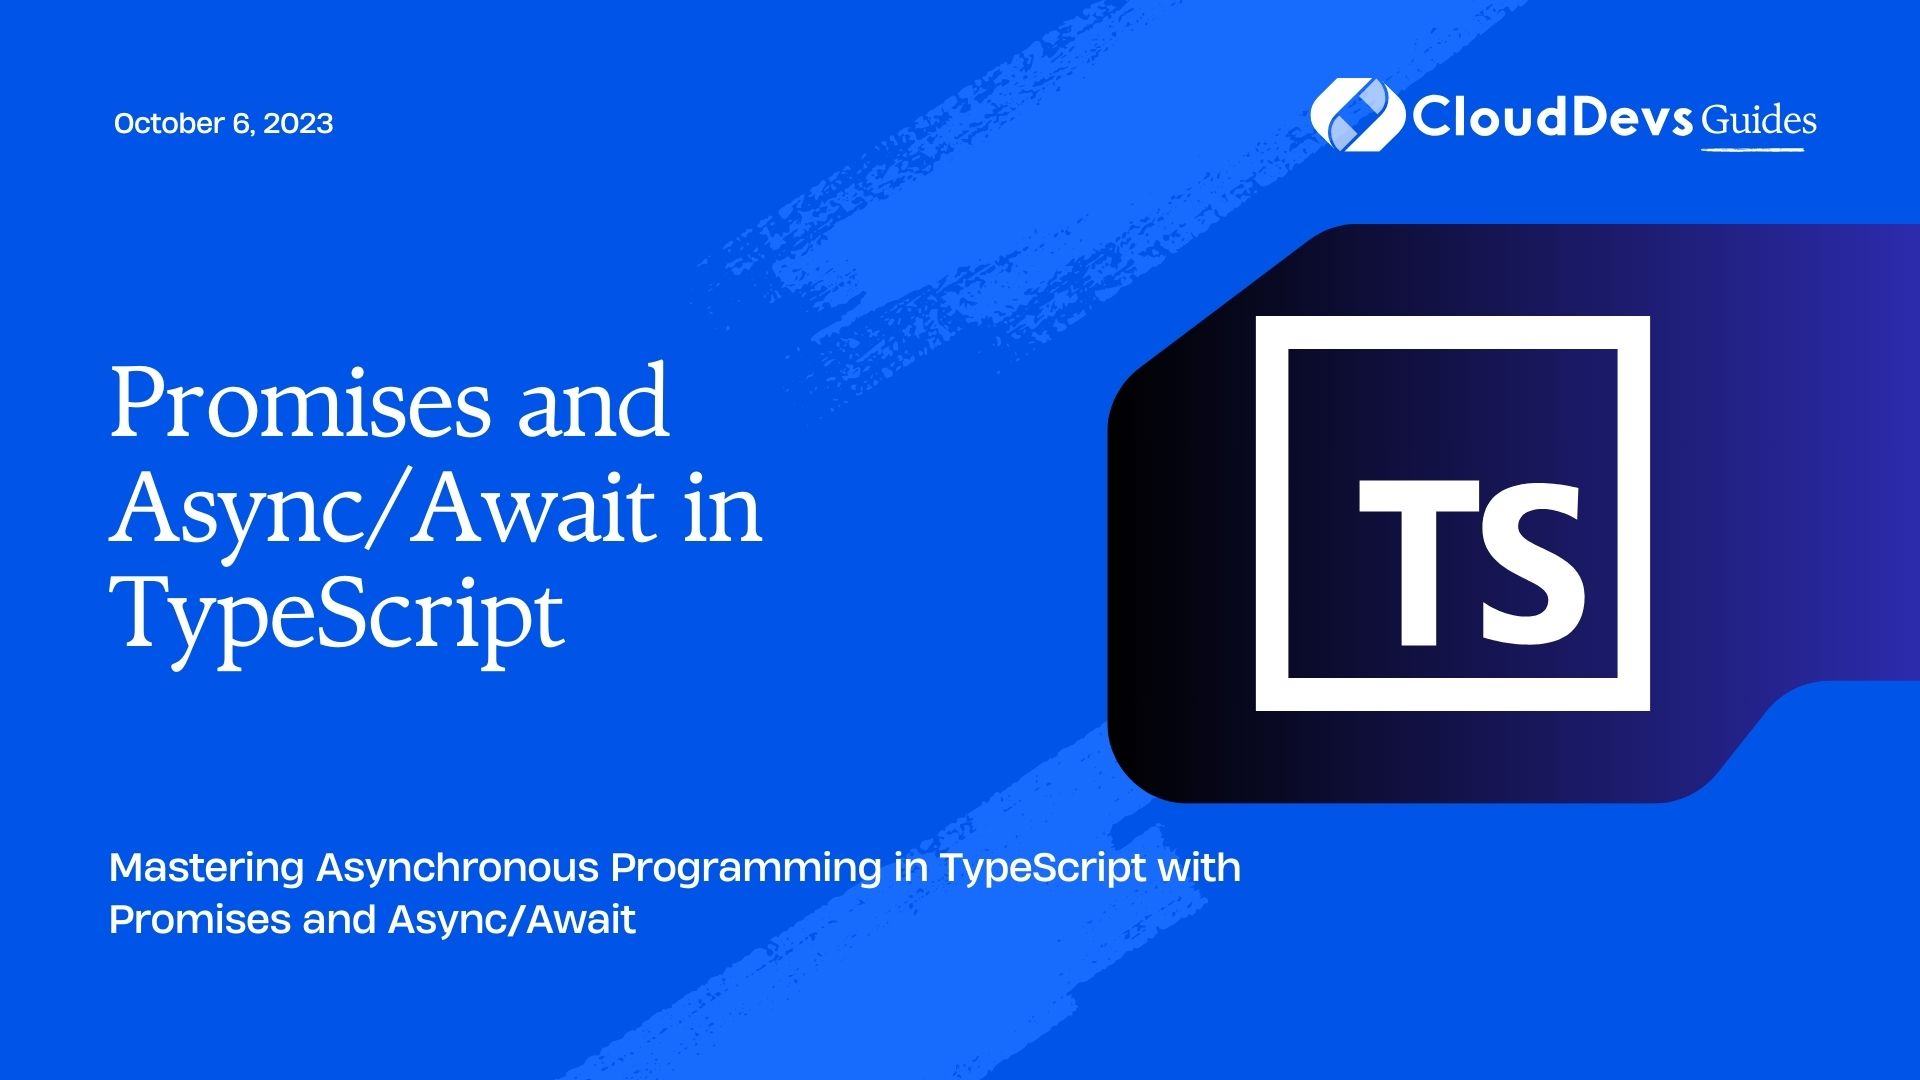 Promises and Async/Await in TypeScript